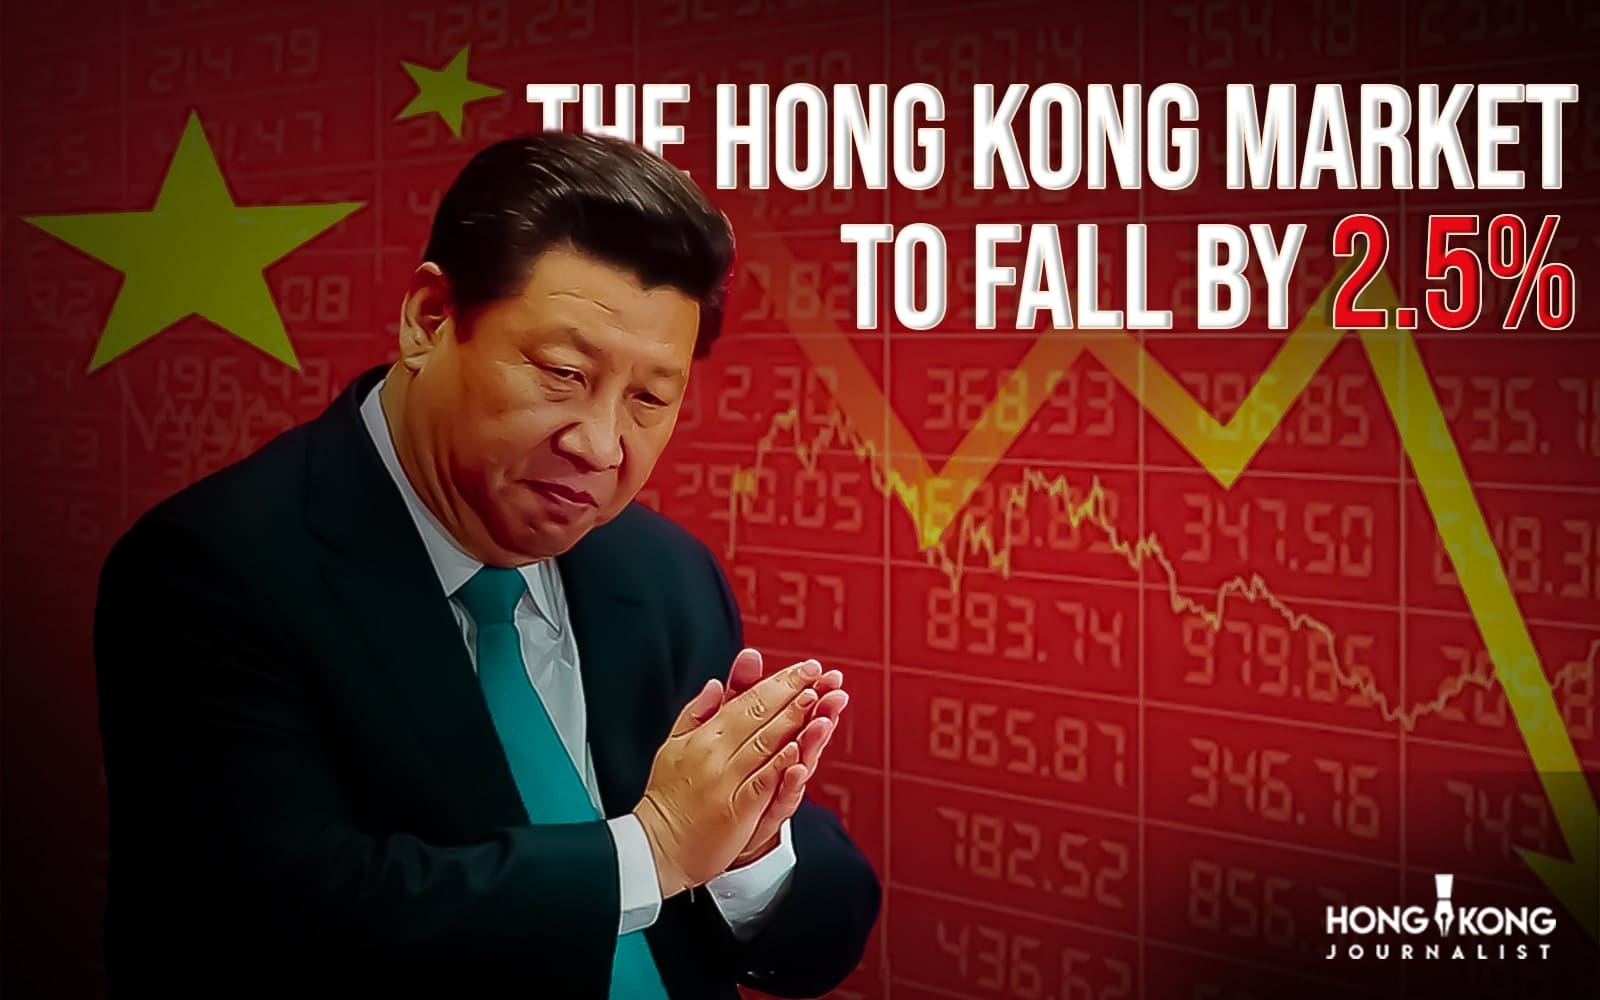 Fears over the Chinese economy caused the Hong Kong market to fall by 2.5.-min